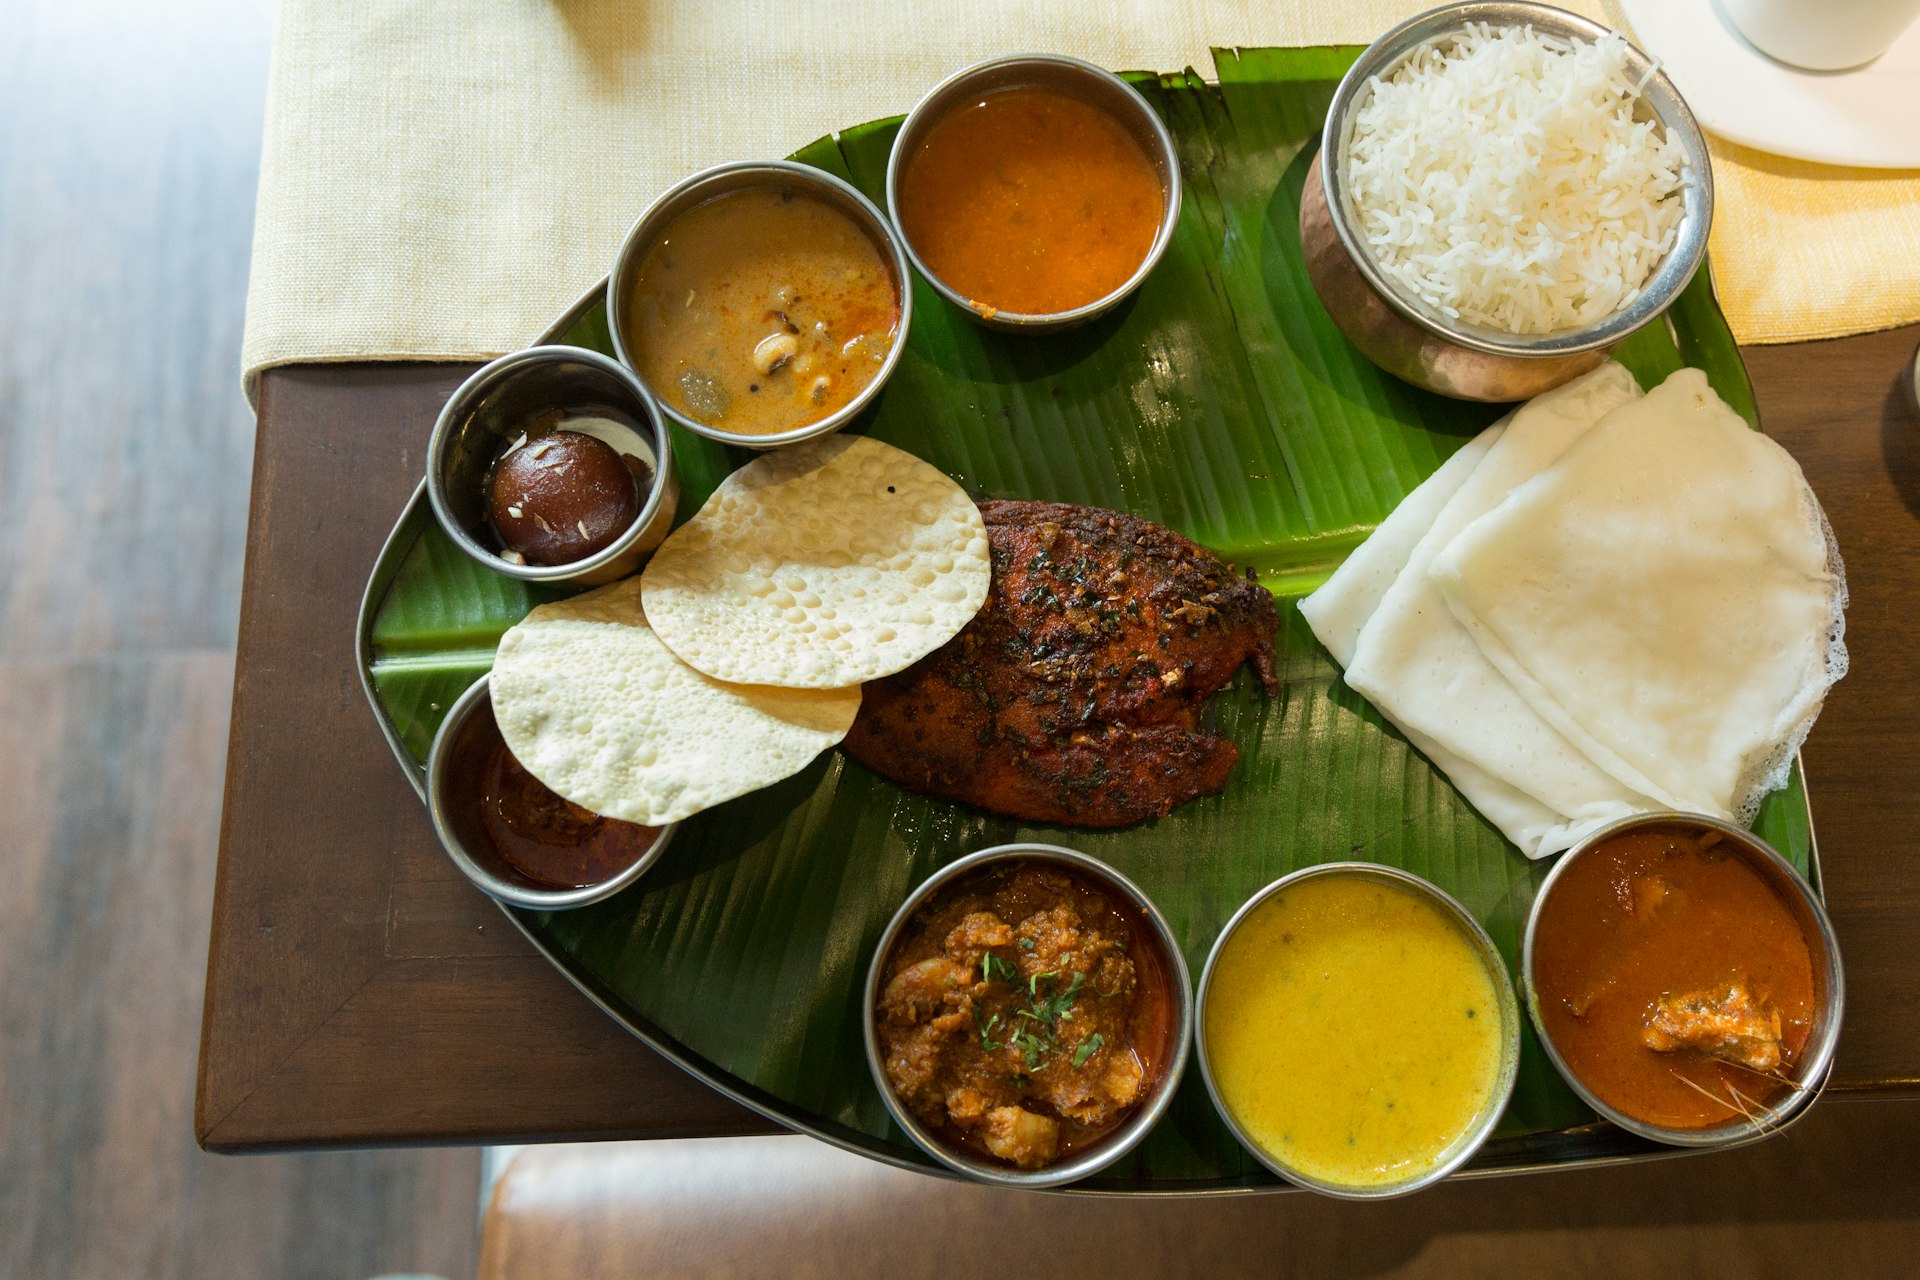 Coastal-style Thali – a feast of Indian flavours. Image by Dan Herrick / Getty Images